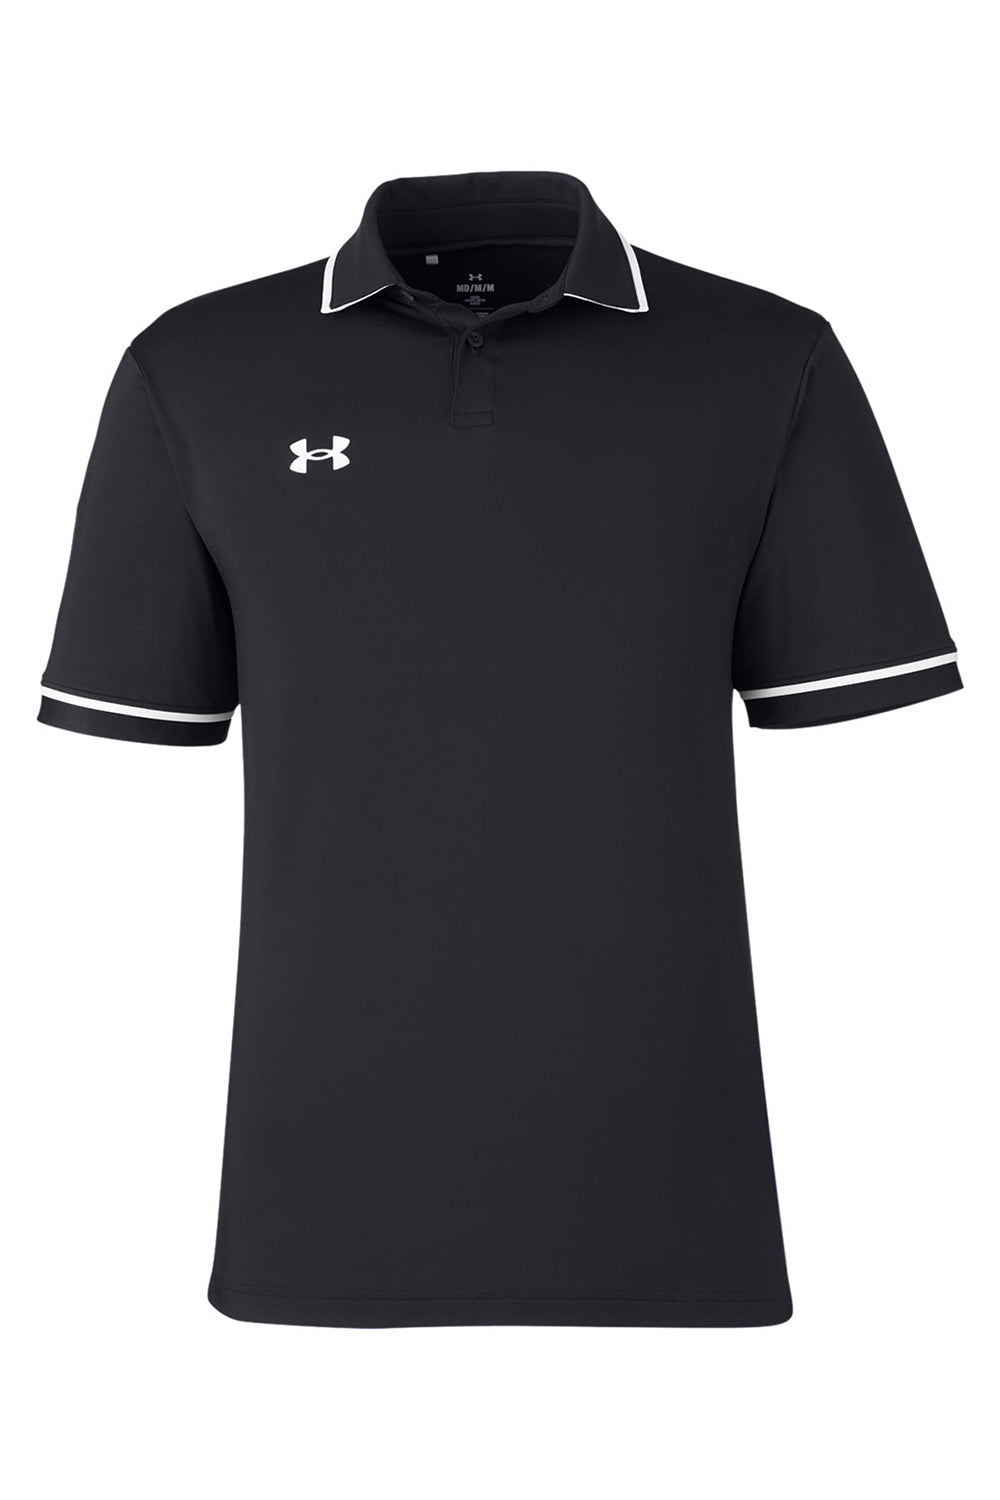 Under Armour 1376904 Mens Teams Performance Moisture Wicking Short Sleeve Polo Shirt Black Flat Front